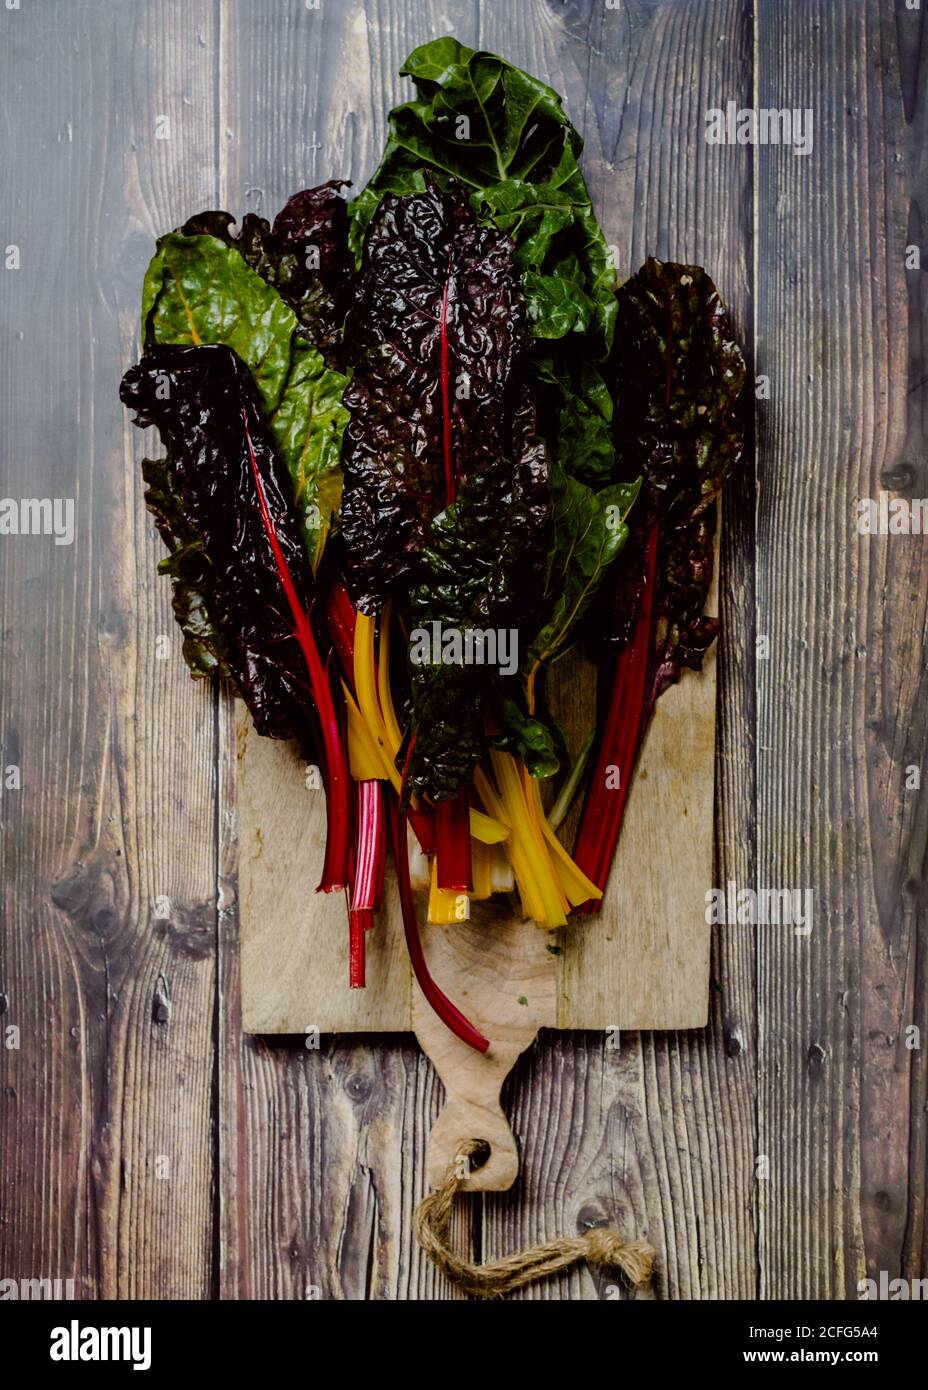 Bunch of vivid varicolored fresh foliage of edible herbs and vegetables over wooden cutting board placed on old rustic table Stock Photo